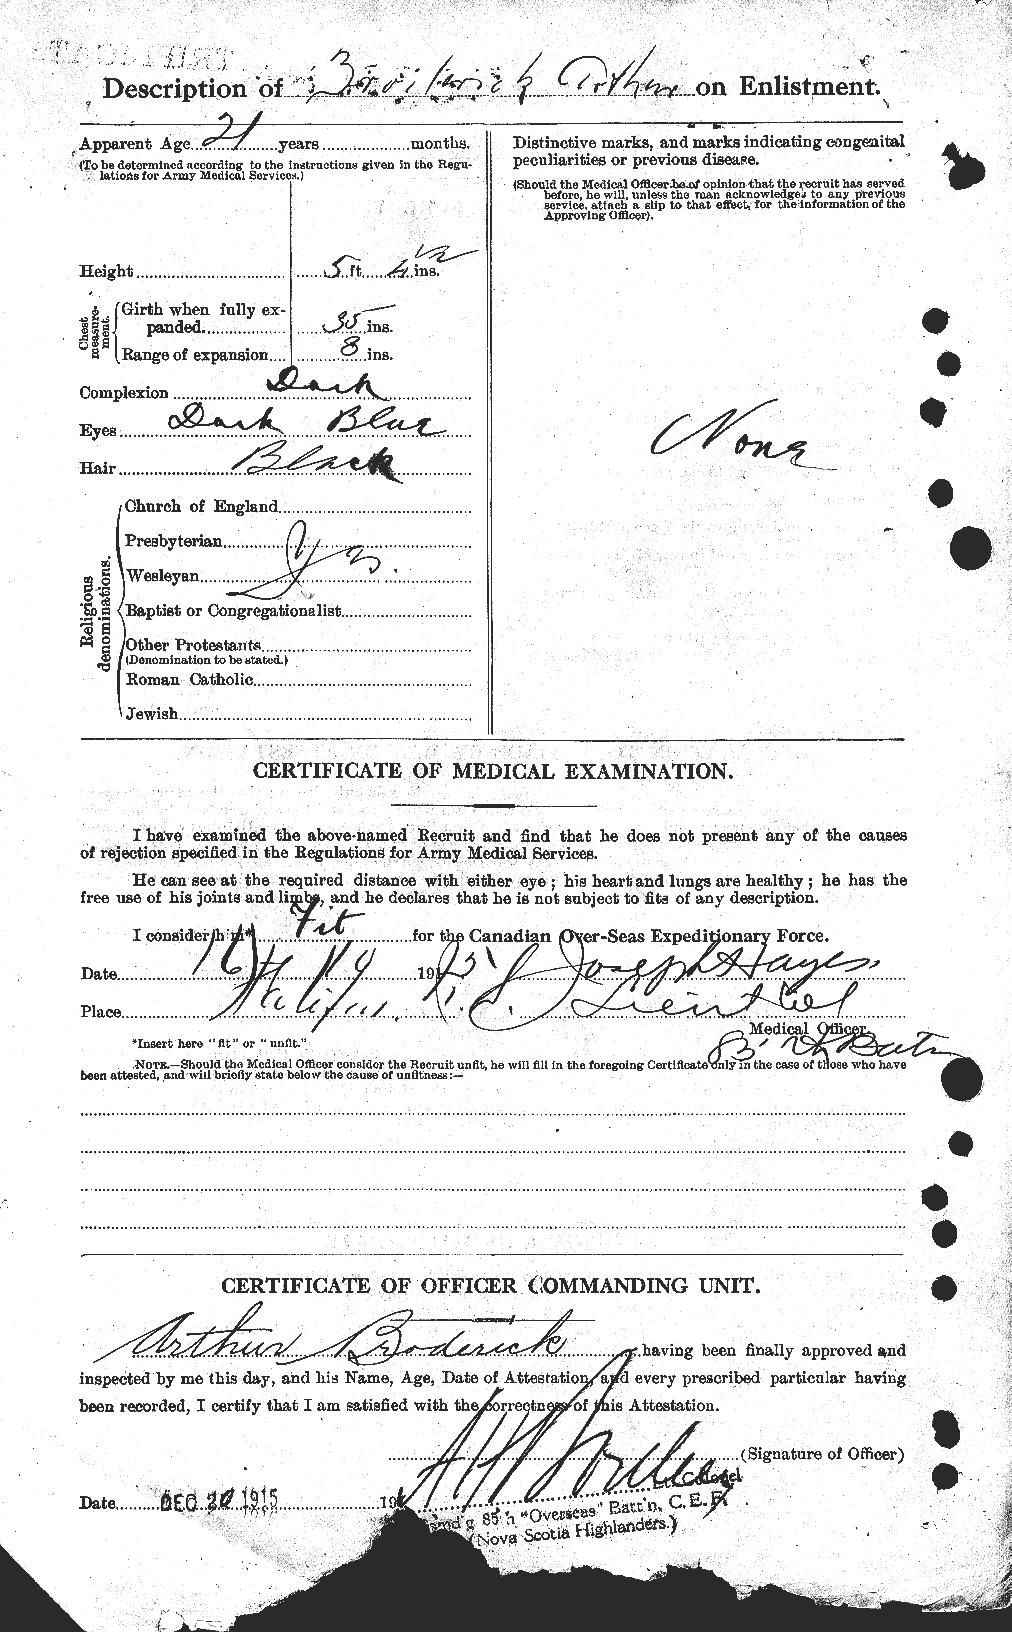 Personnel Records of the First World War - CEF 260965b